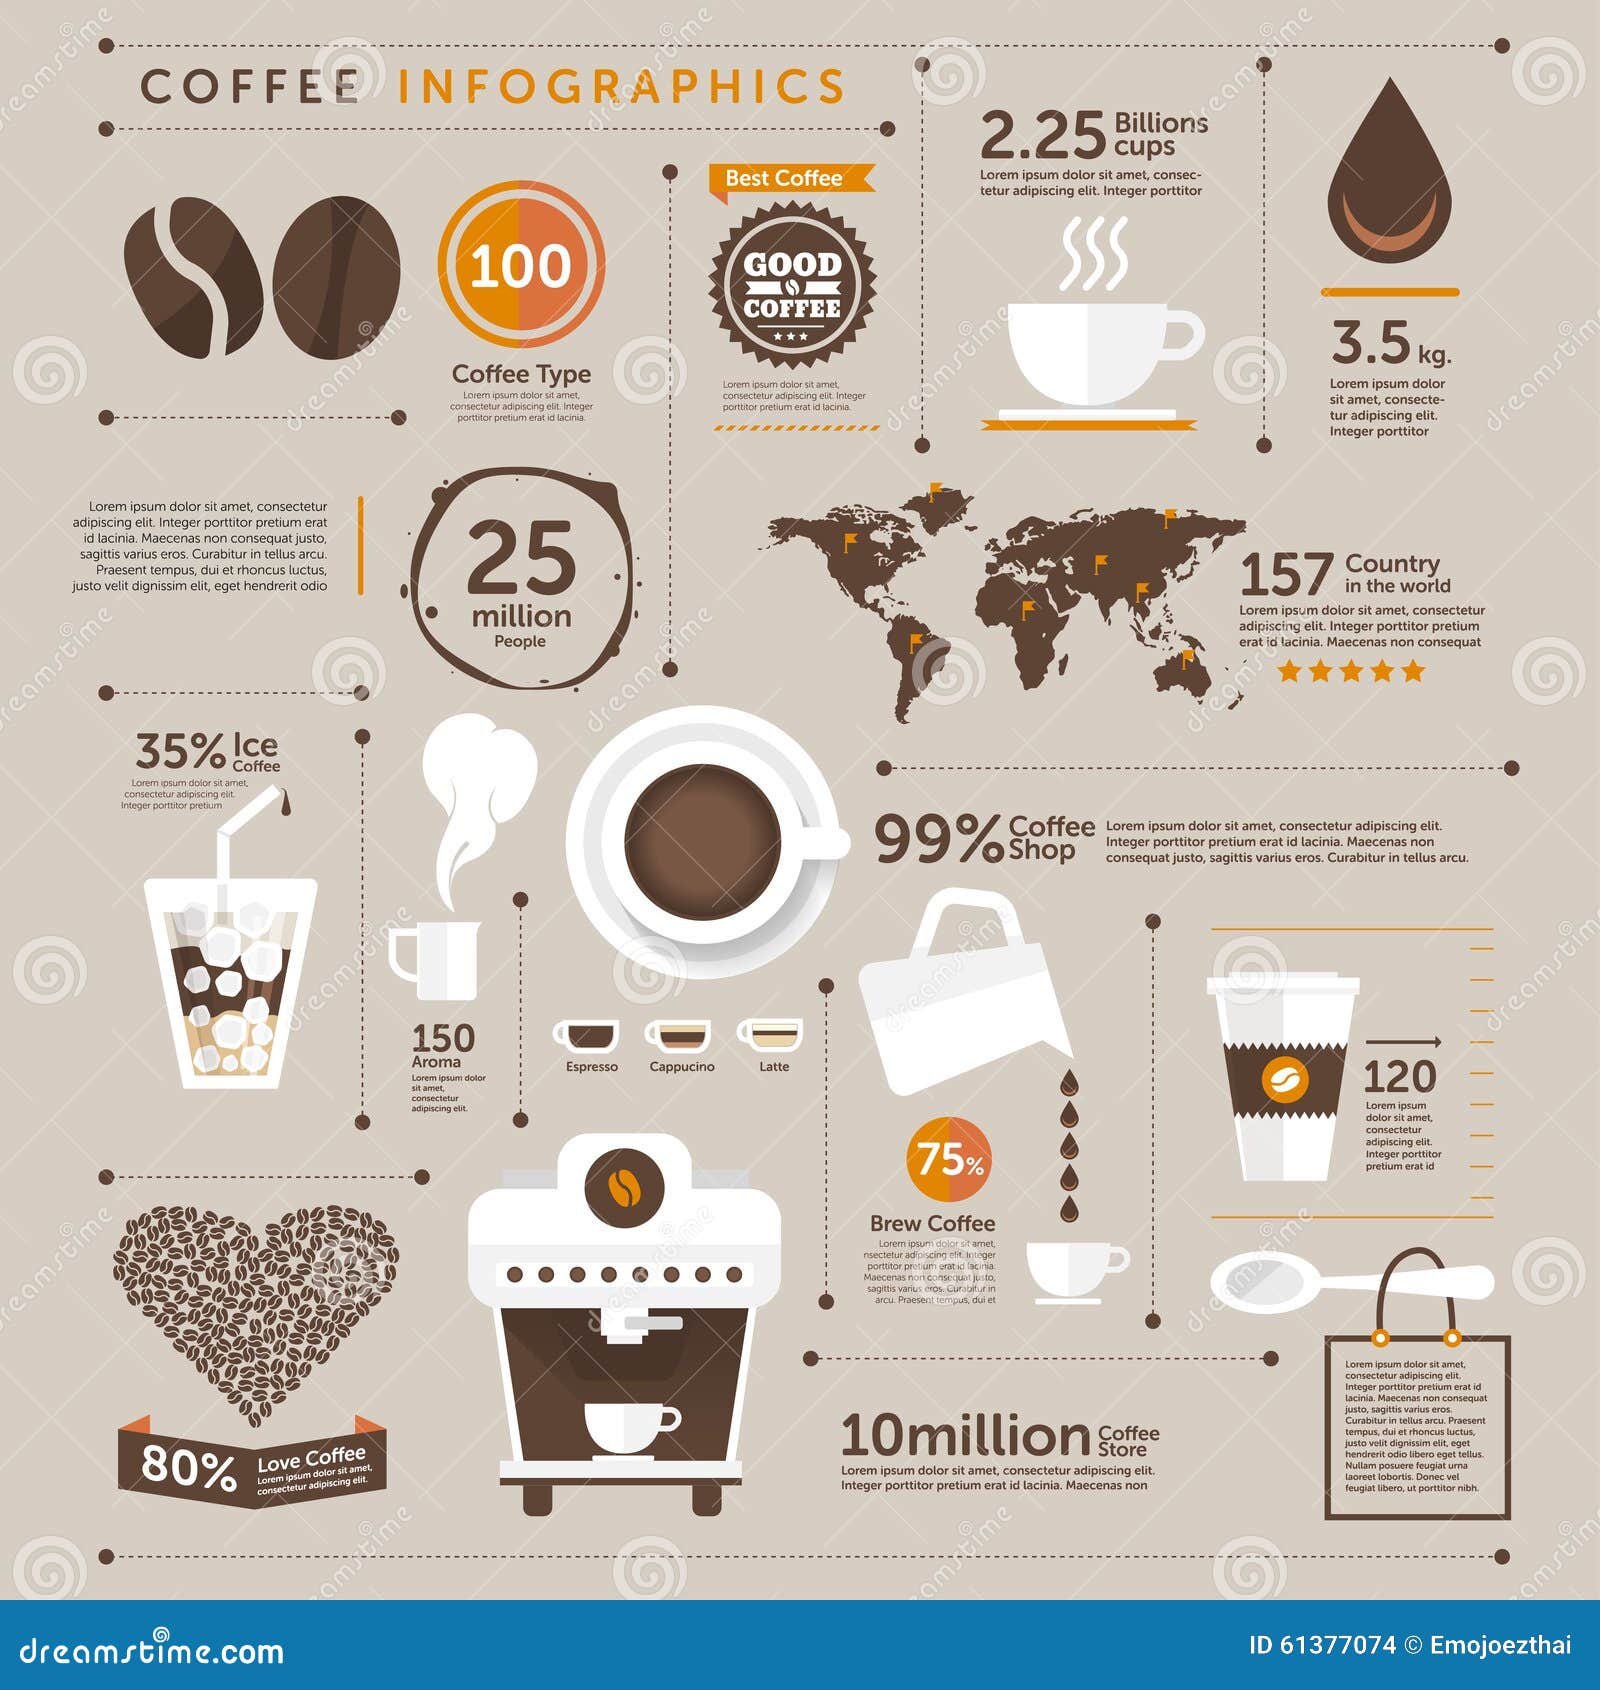 Icons Coffee stock vector. Illustration of badge, business - 61377074